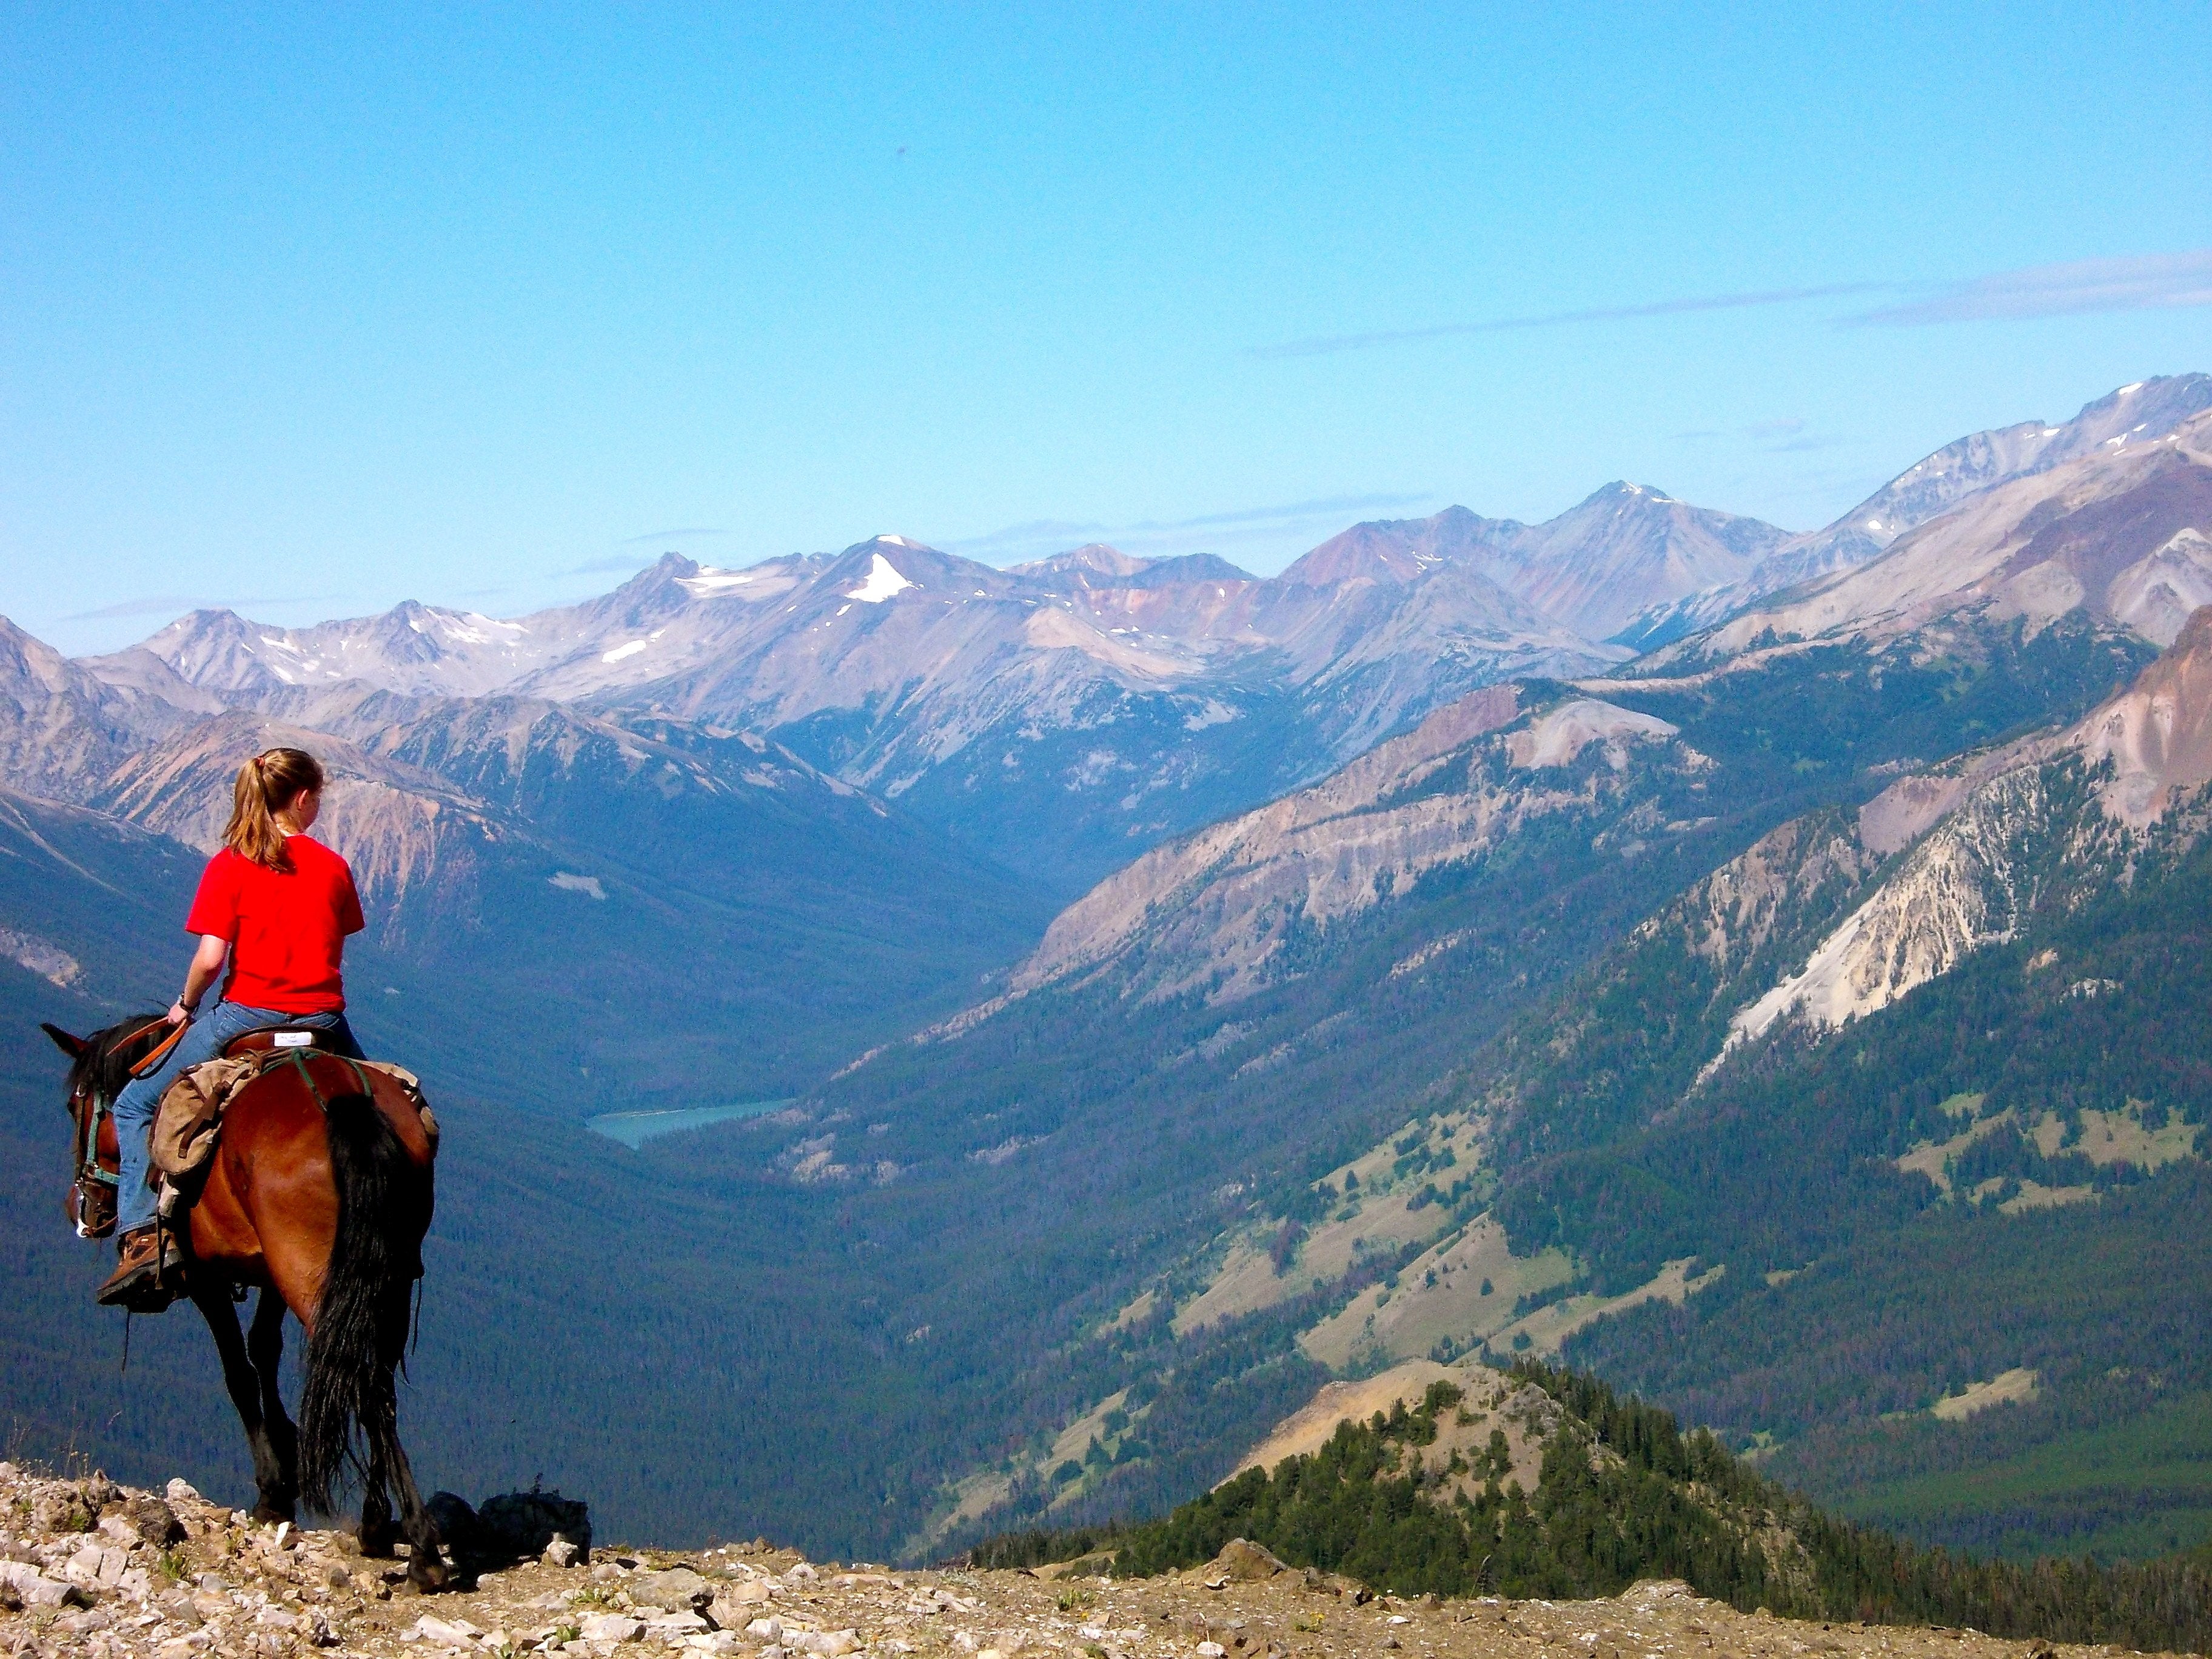 Grizzly Bear Research - horseXperiences™ GO EQUESTRIAN